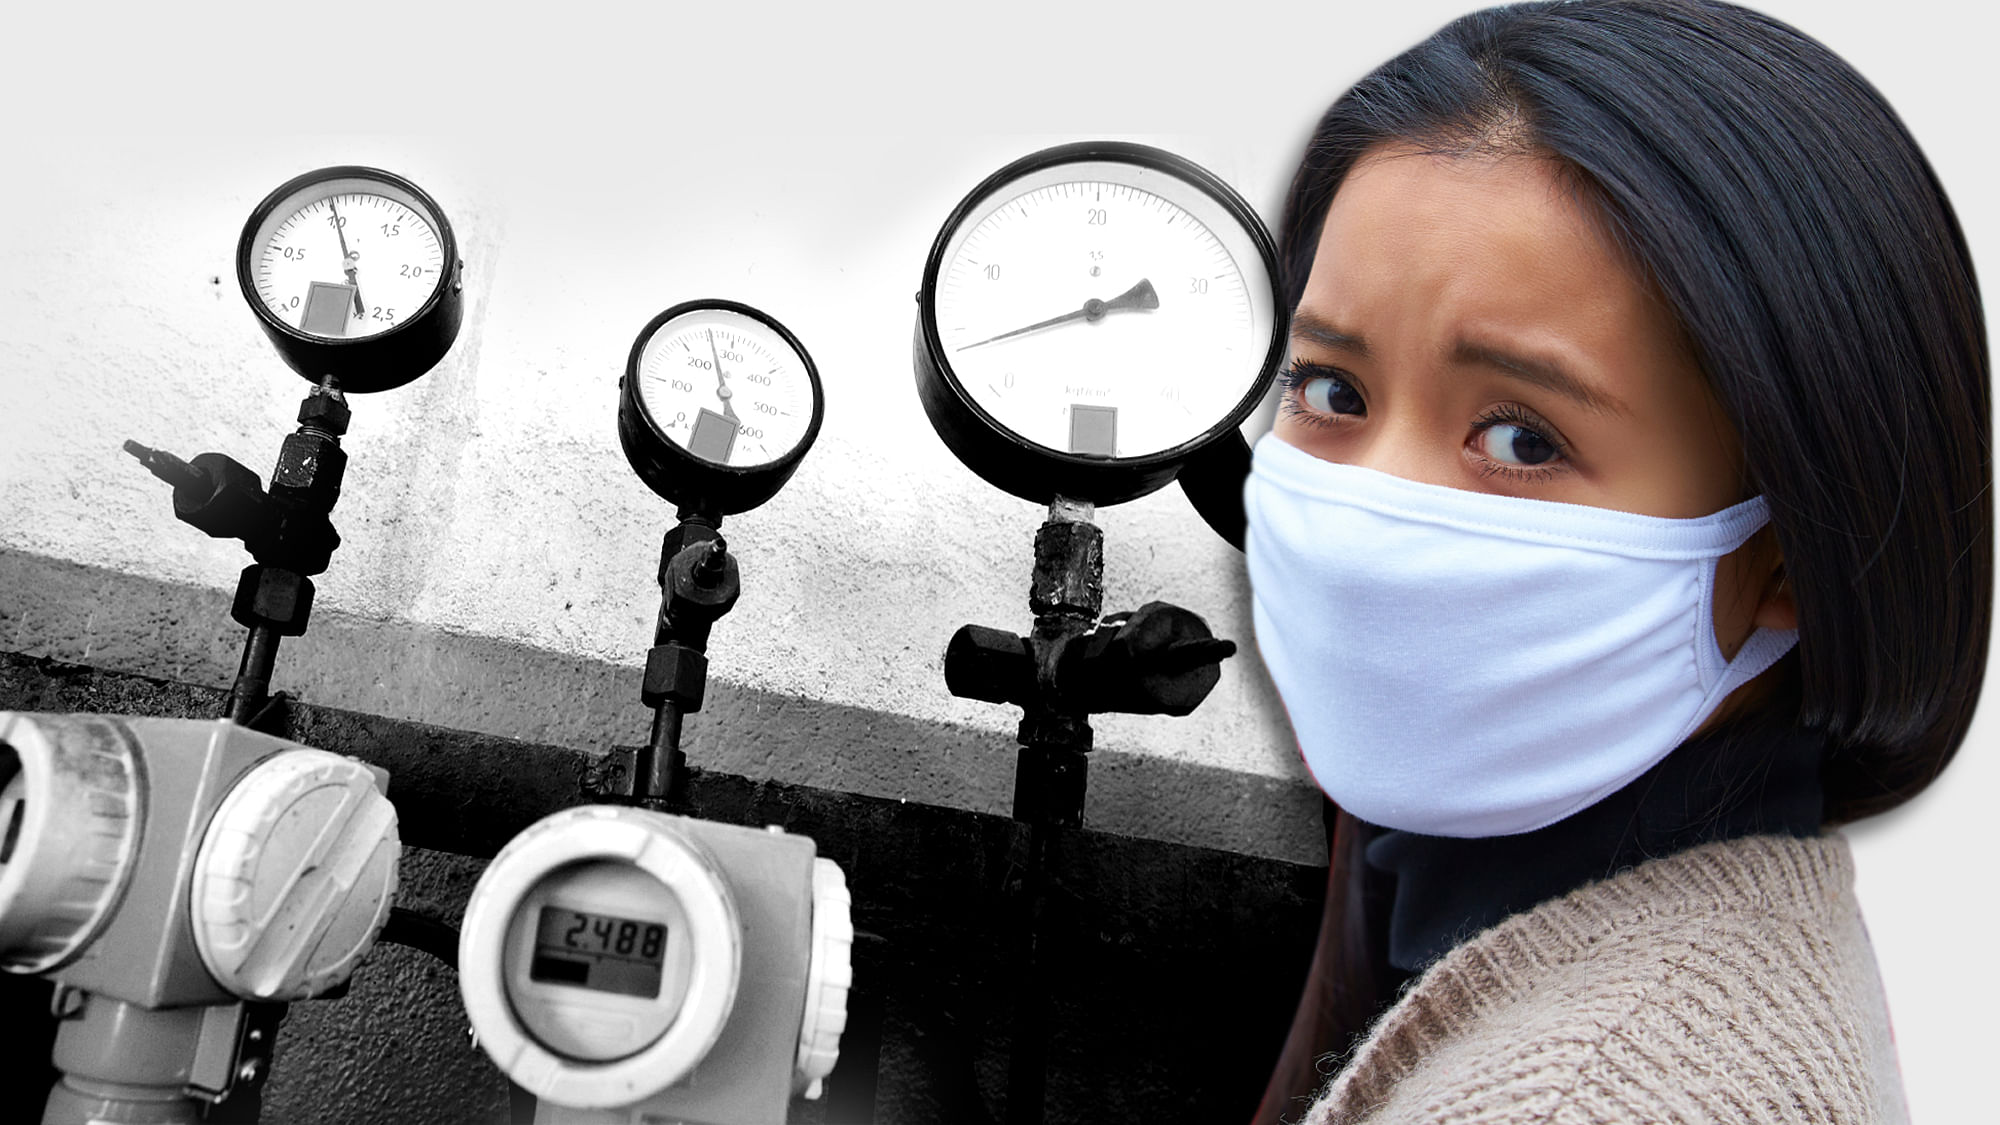 One of the biggest spinoffs of the odd-even experiment in the capital is that it has made people aware of air pollution. (Photo: <b>The Quint</b>)